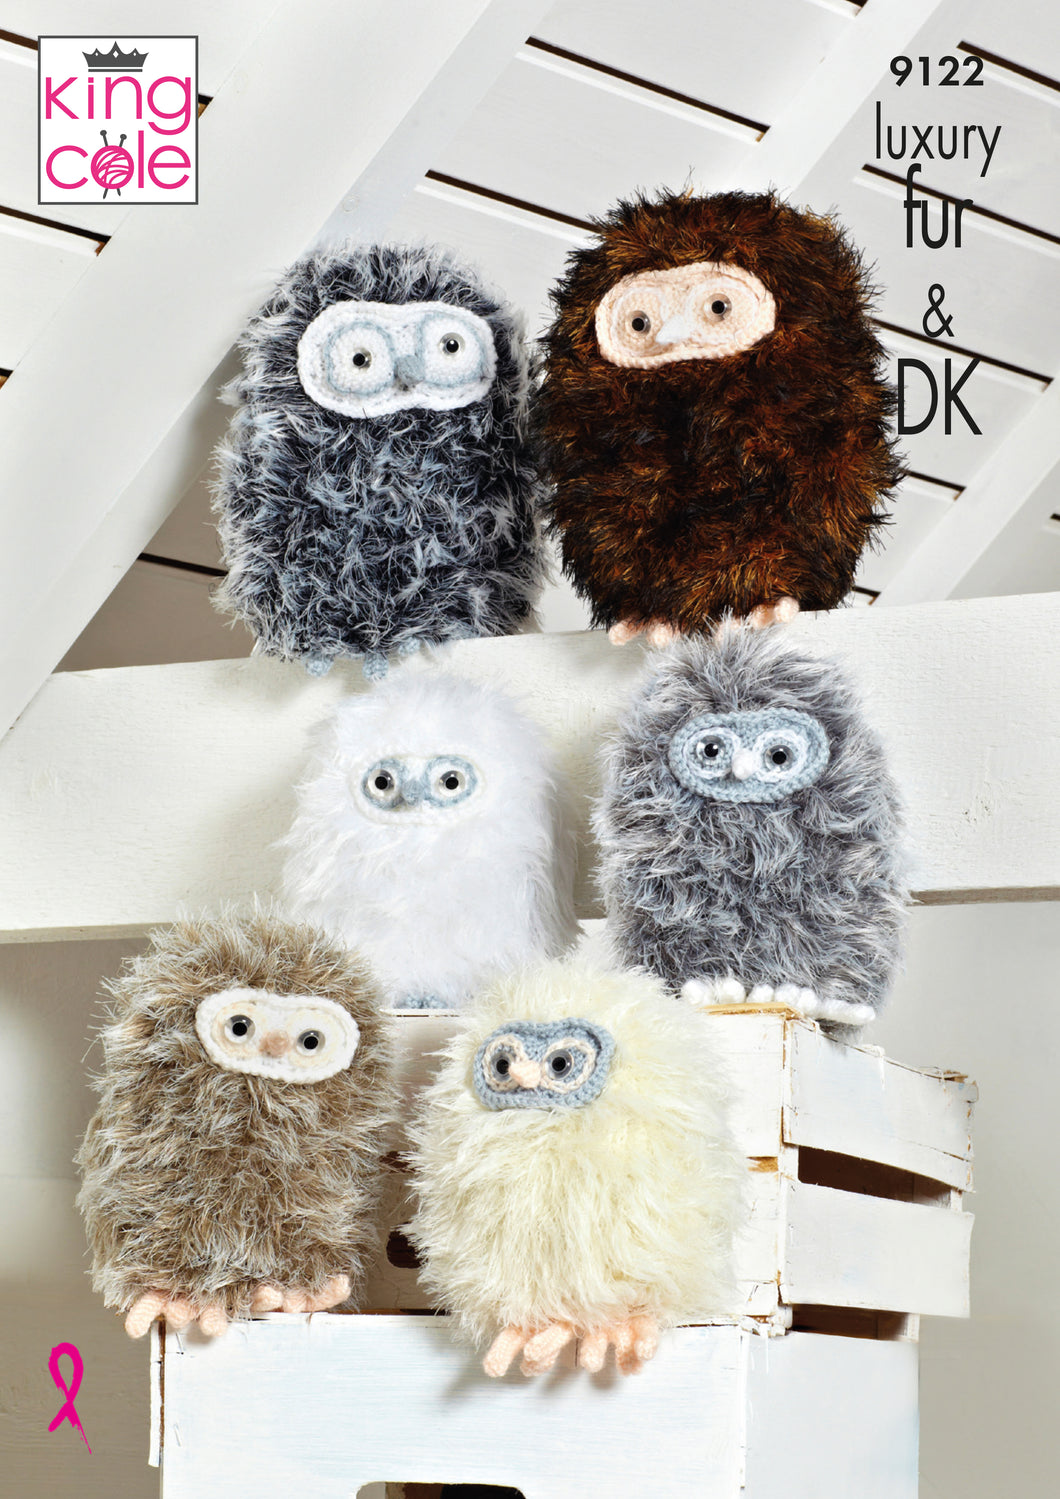 Baby Owls Knitted in Luxury Fur 9122